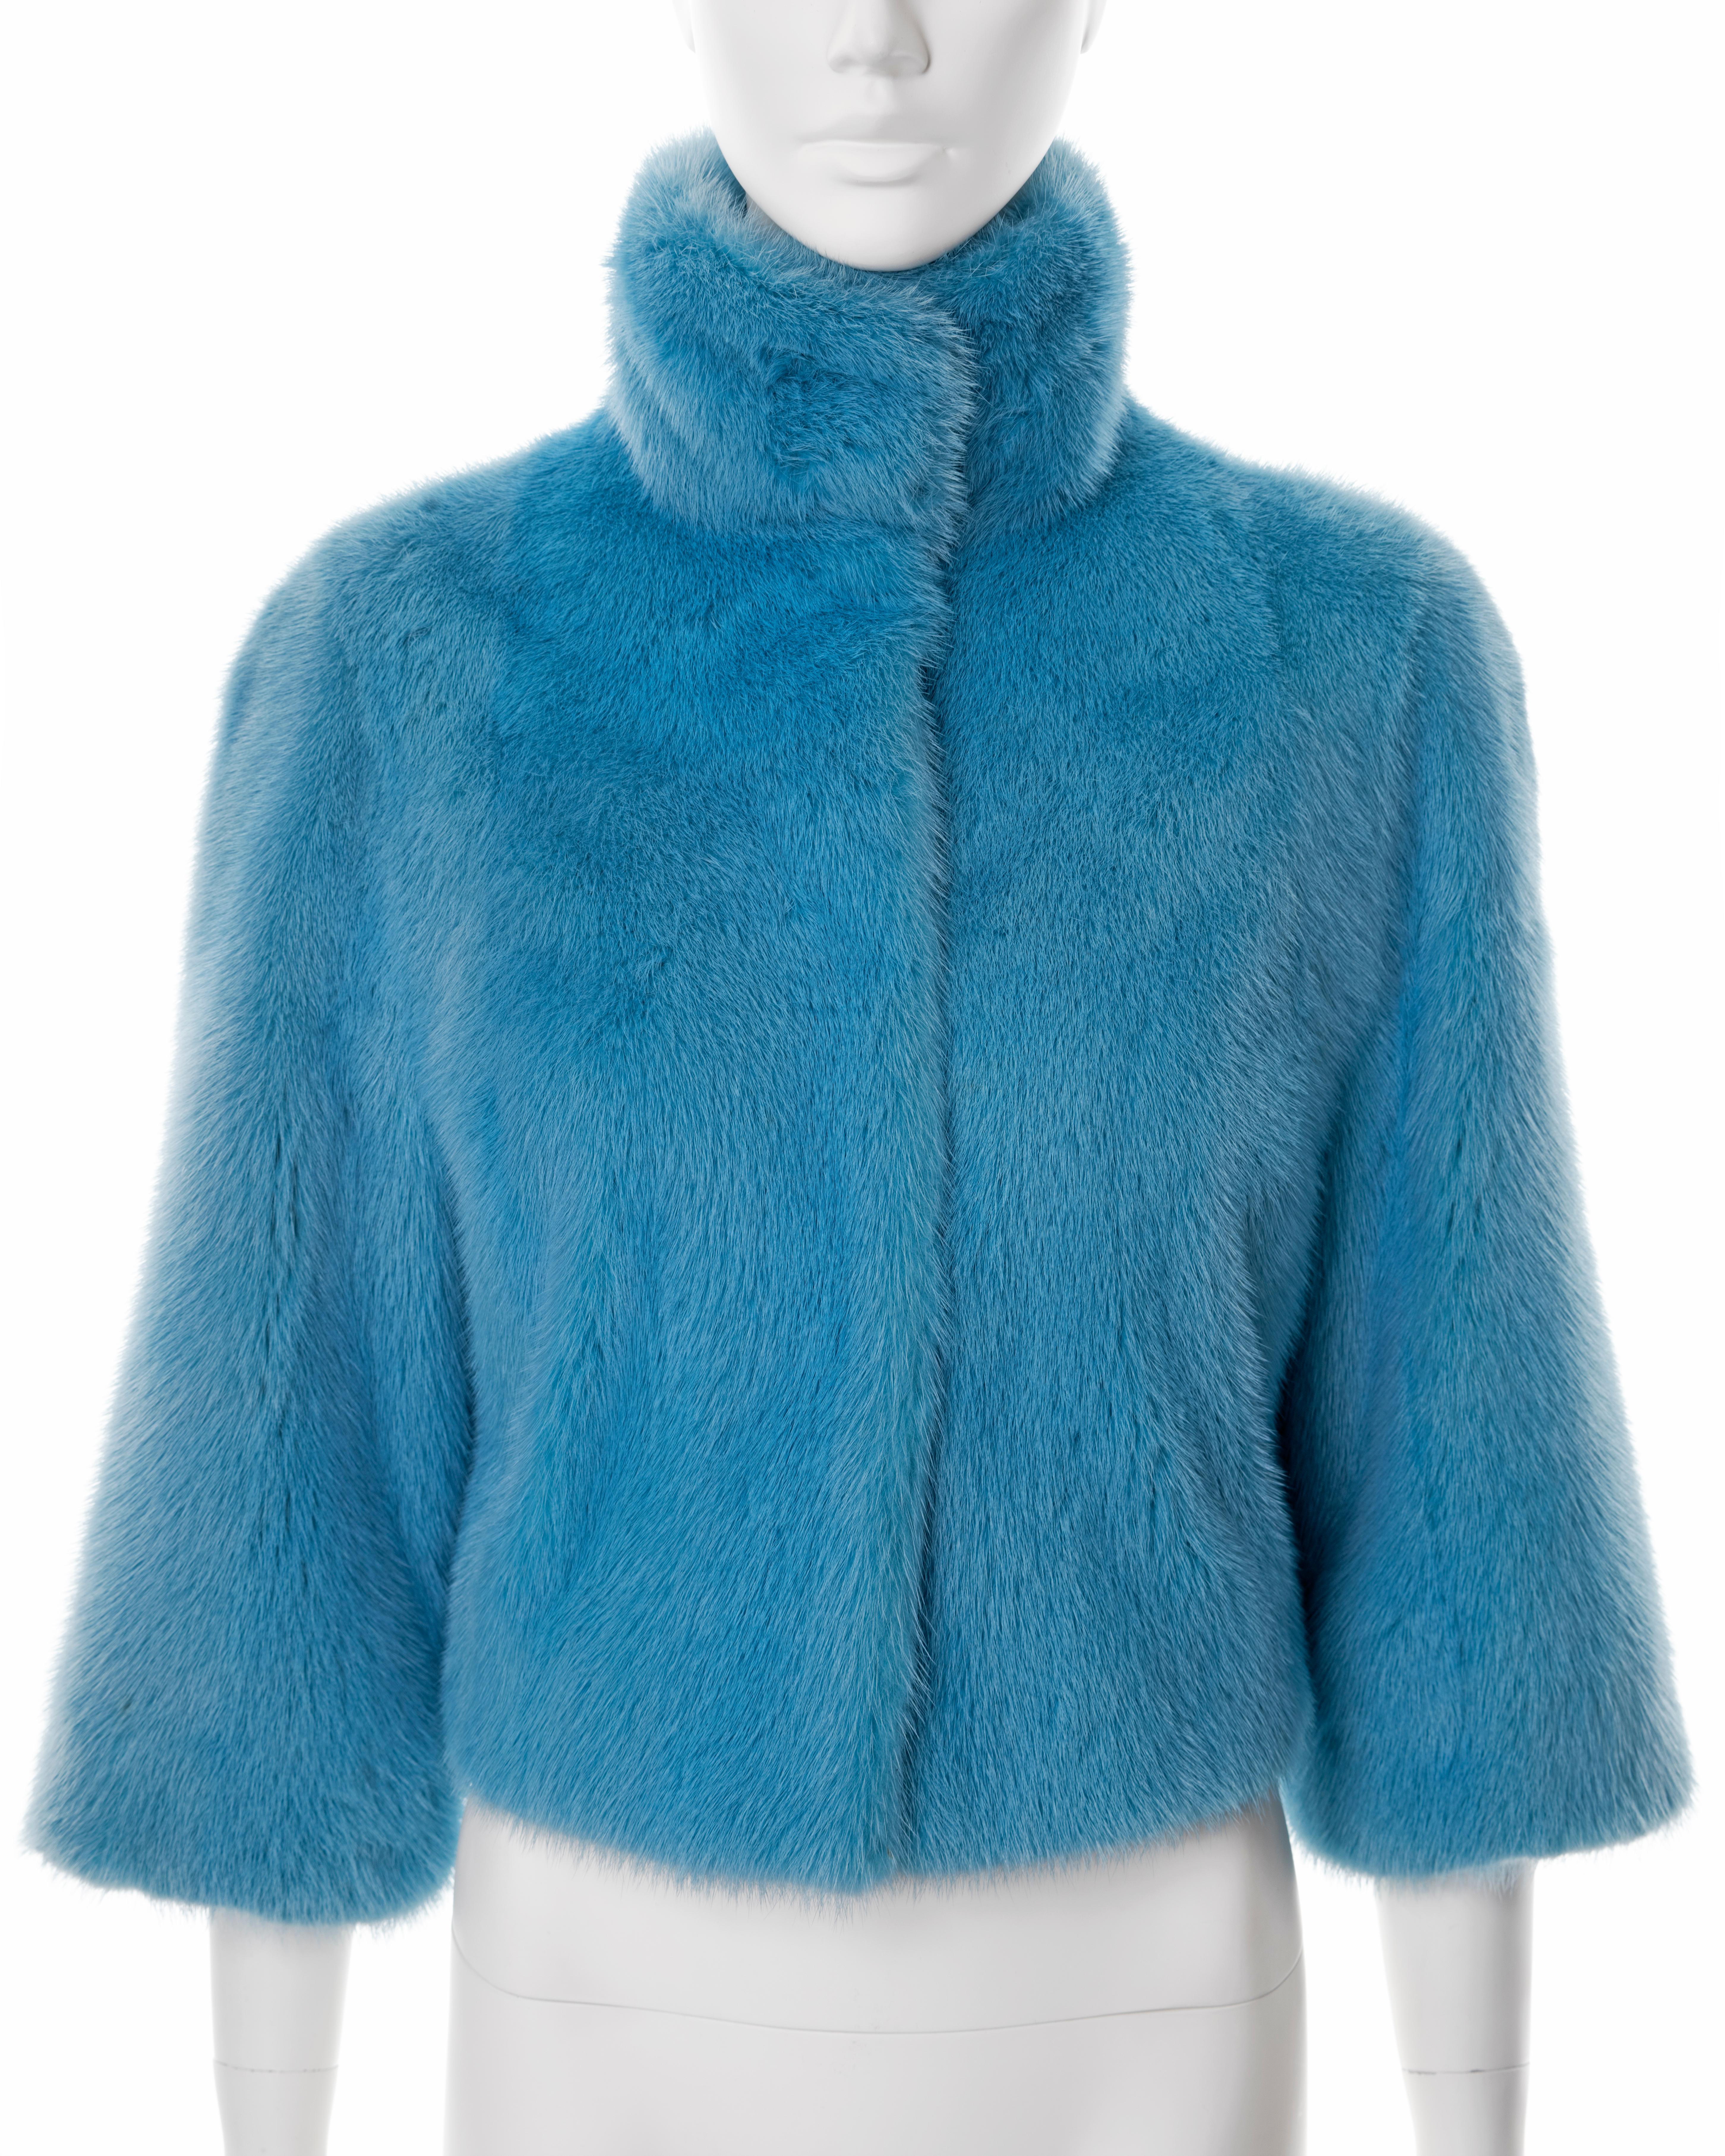 Dolce & Gabbana blue mink fur cropped jacket, fw 1999 In Excellent Condition For Sale In London, GB